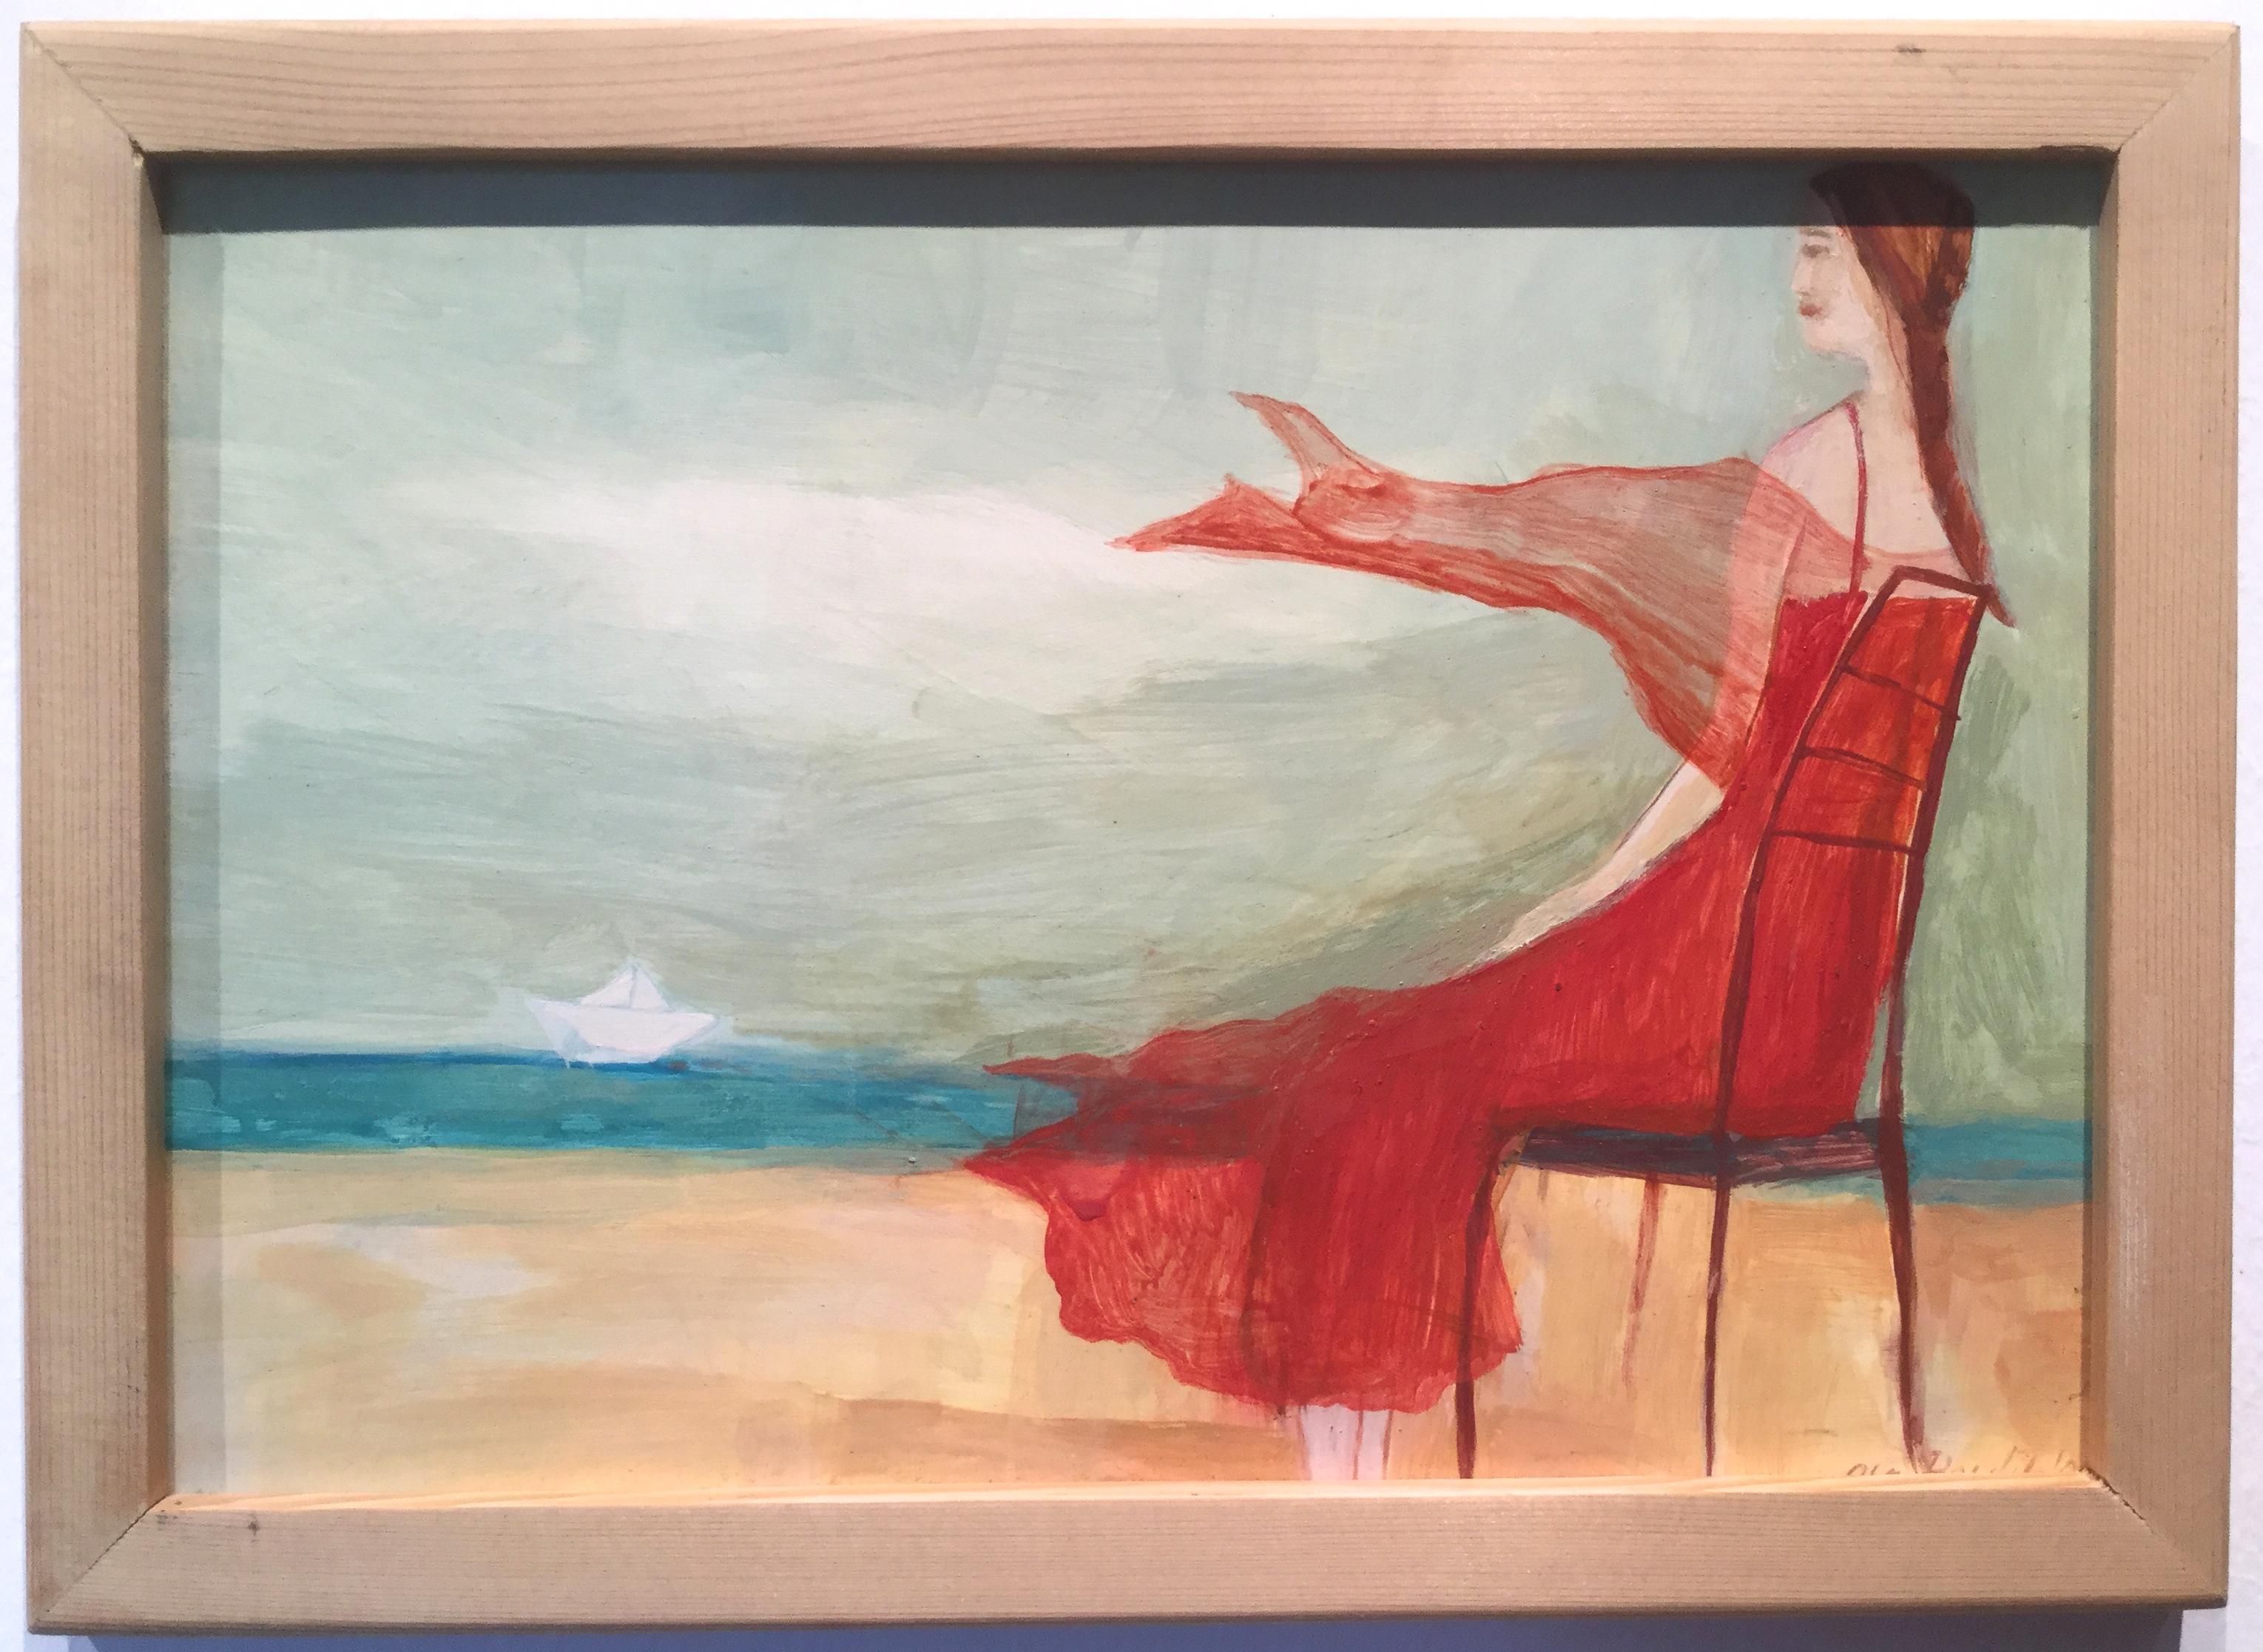 Girl In Red Dress Looks At The Sea - Graceful Illustrative Romantic Painting For Sale 5